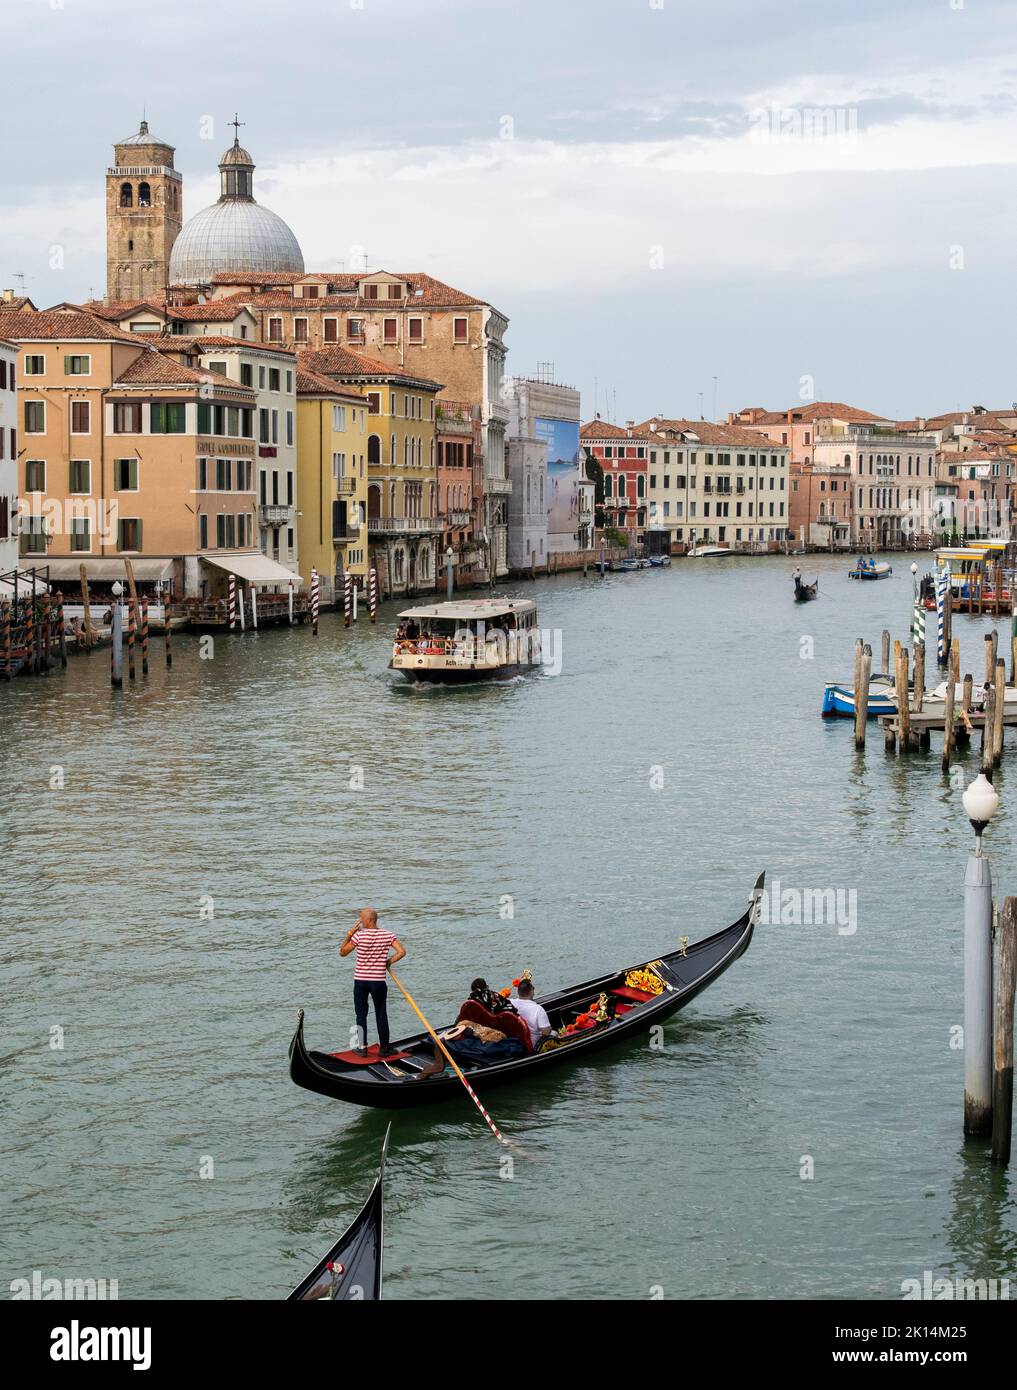 Tourists travelling at gondolas, typical boats, at the town of Venice, Italy Stock Photo